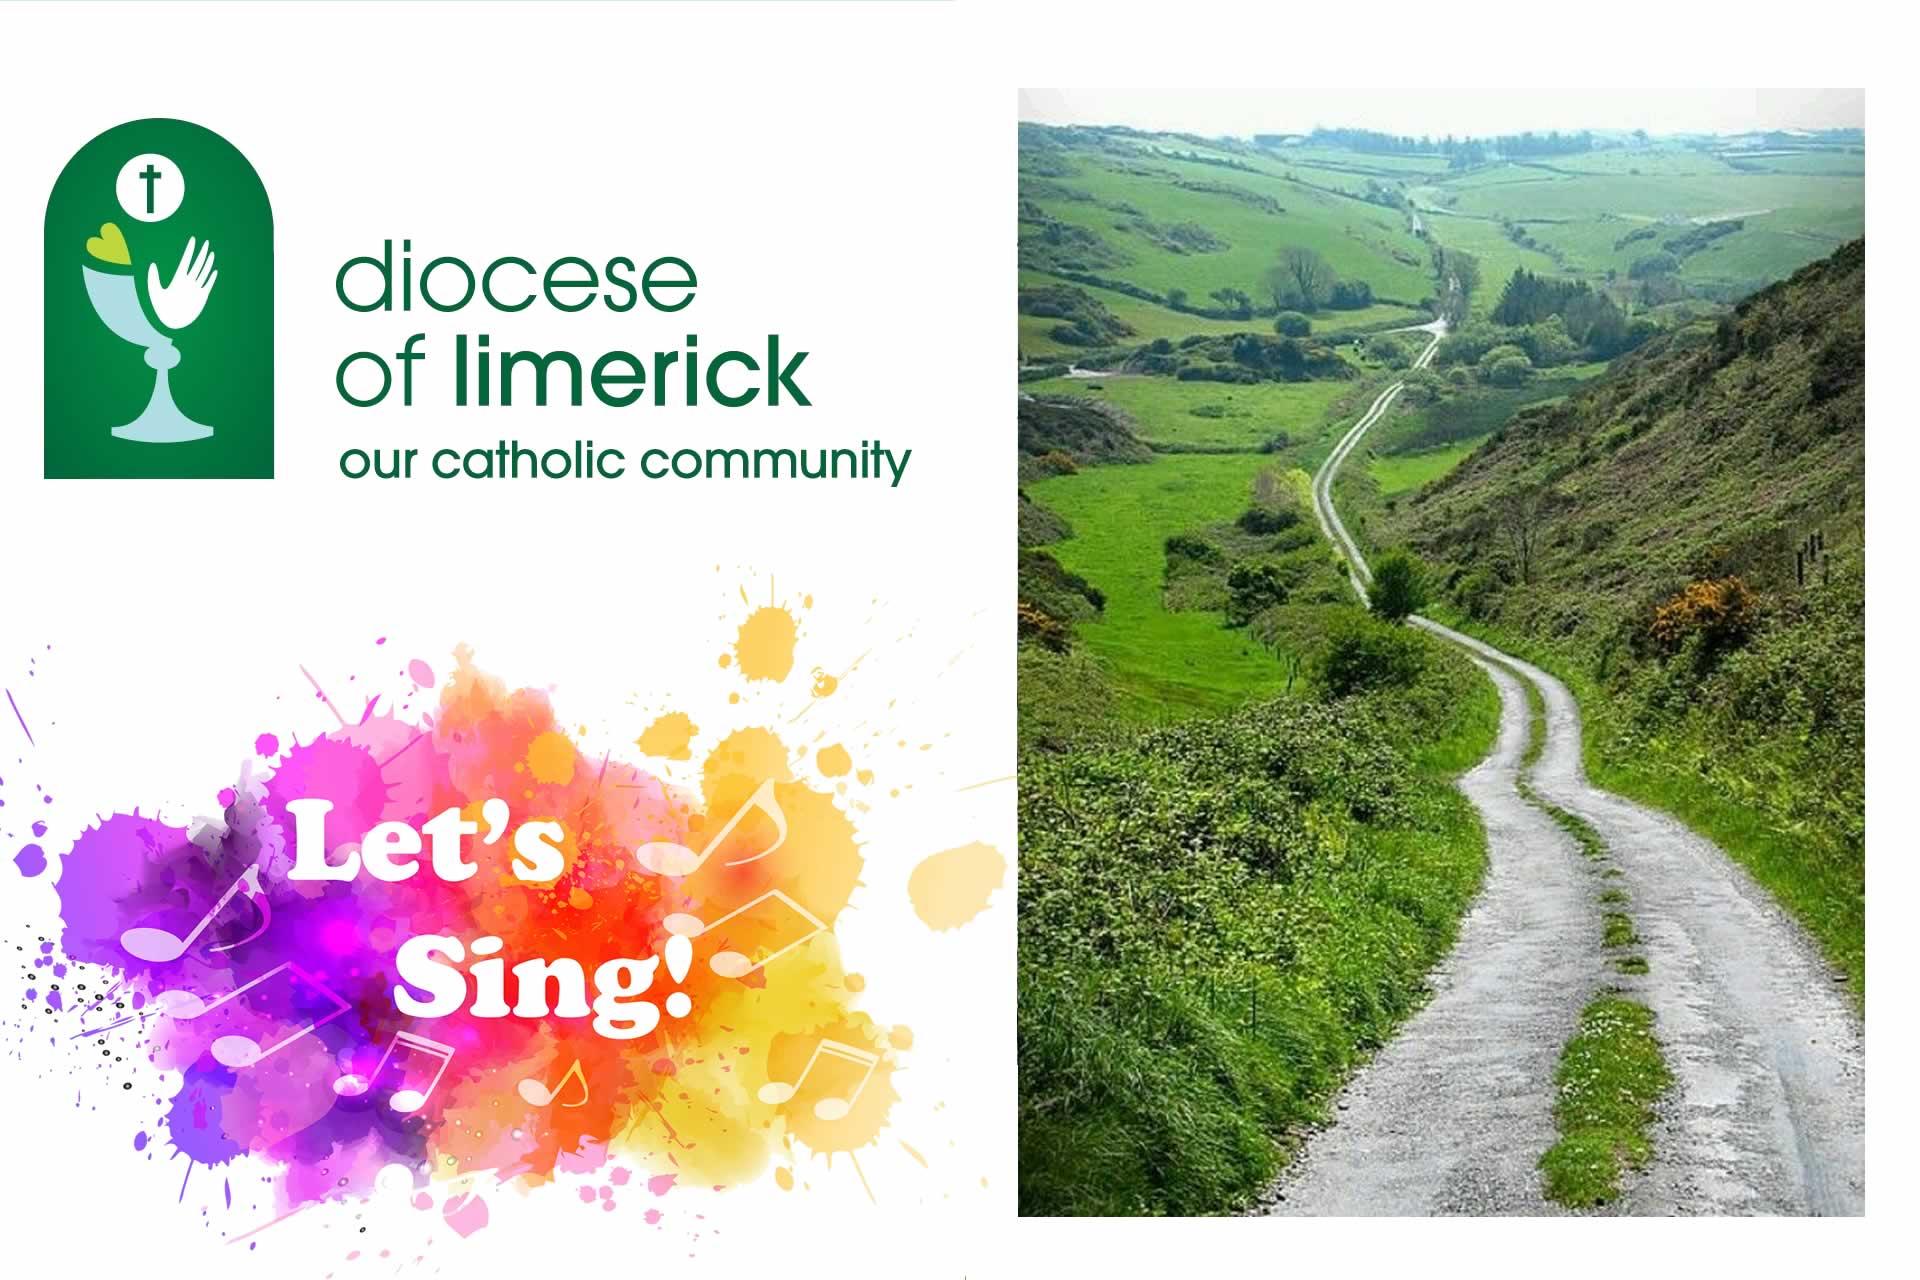 Let's Sing! - May the road rise to meet you (Irish blessing)